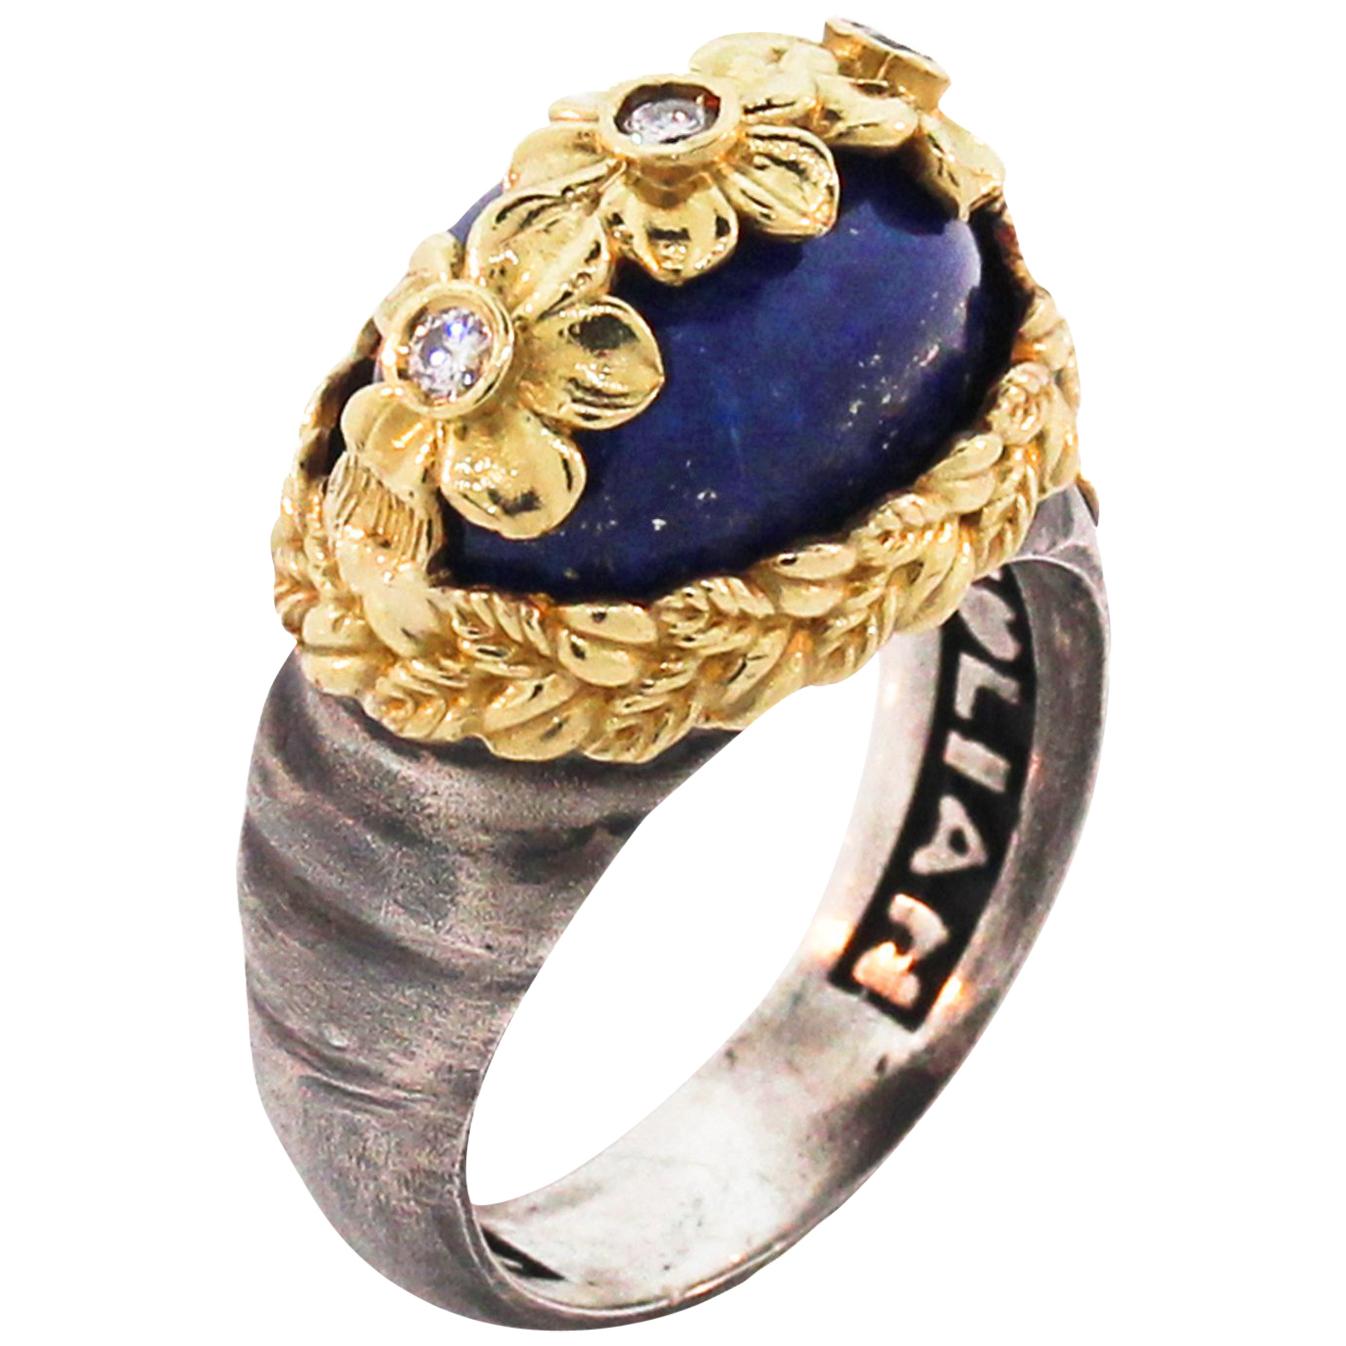 Lapis Lazuli and Diamond Floral Ring with Sterling Silver and Gold Stambolian